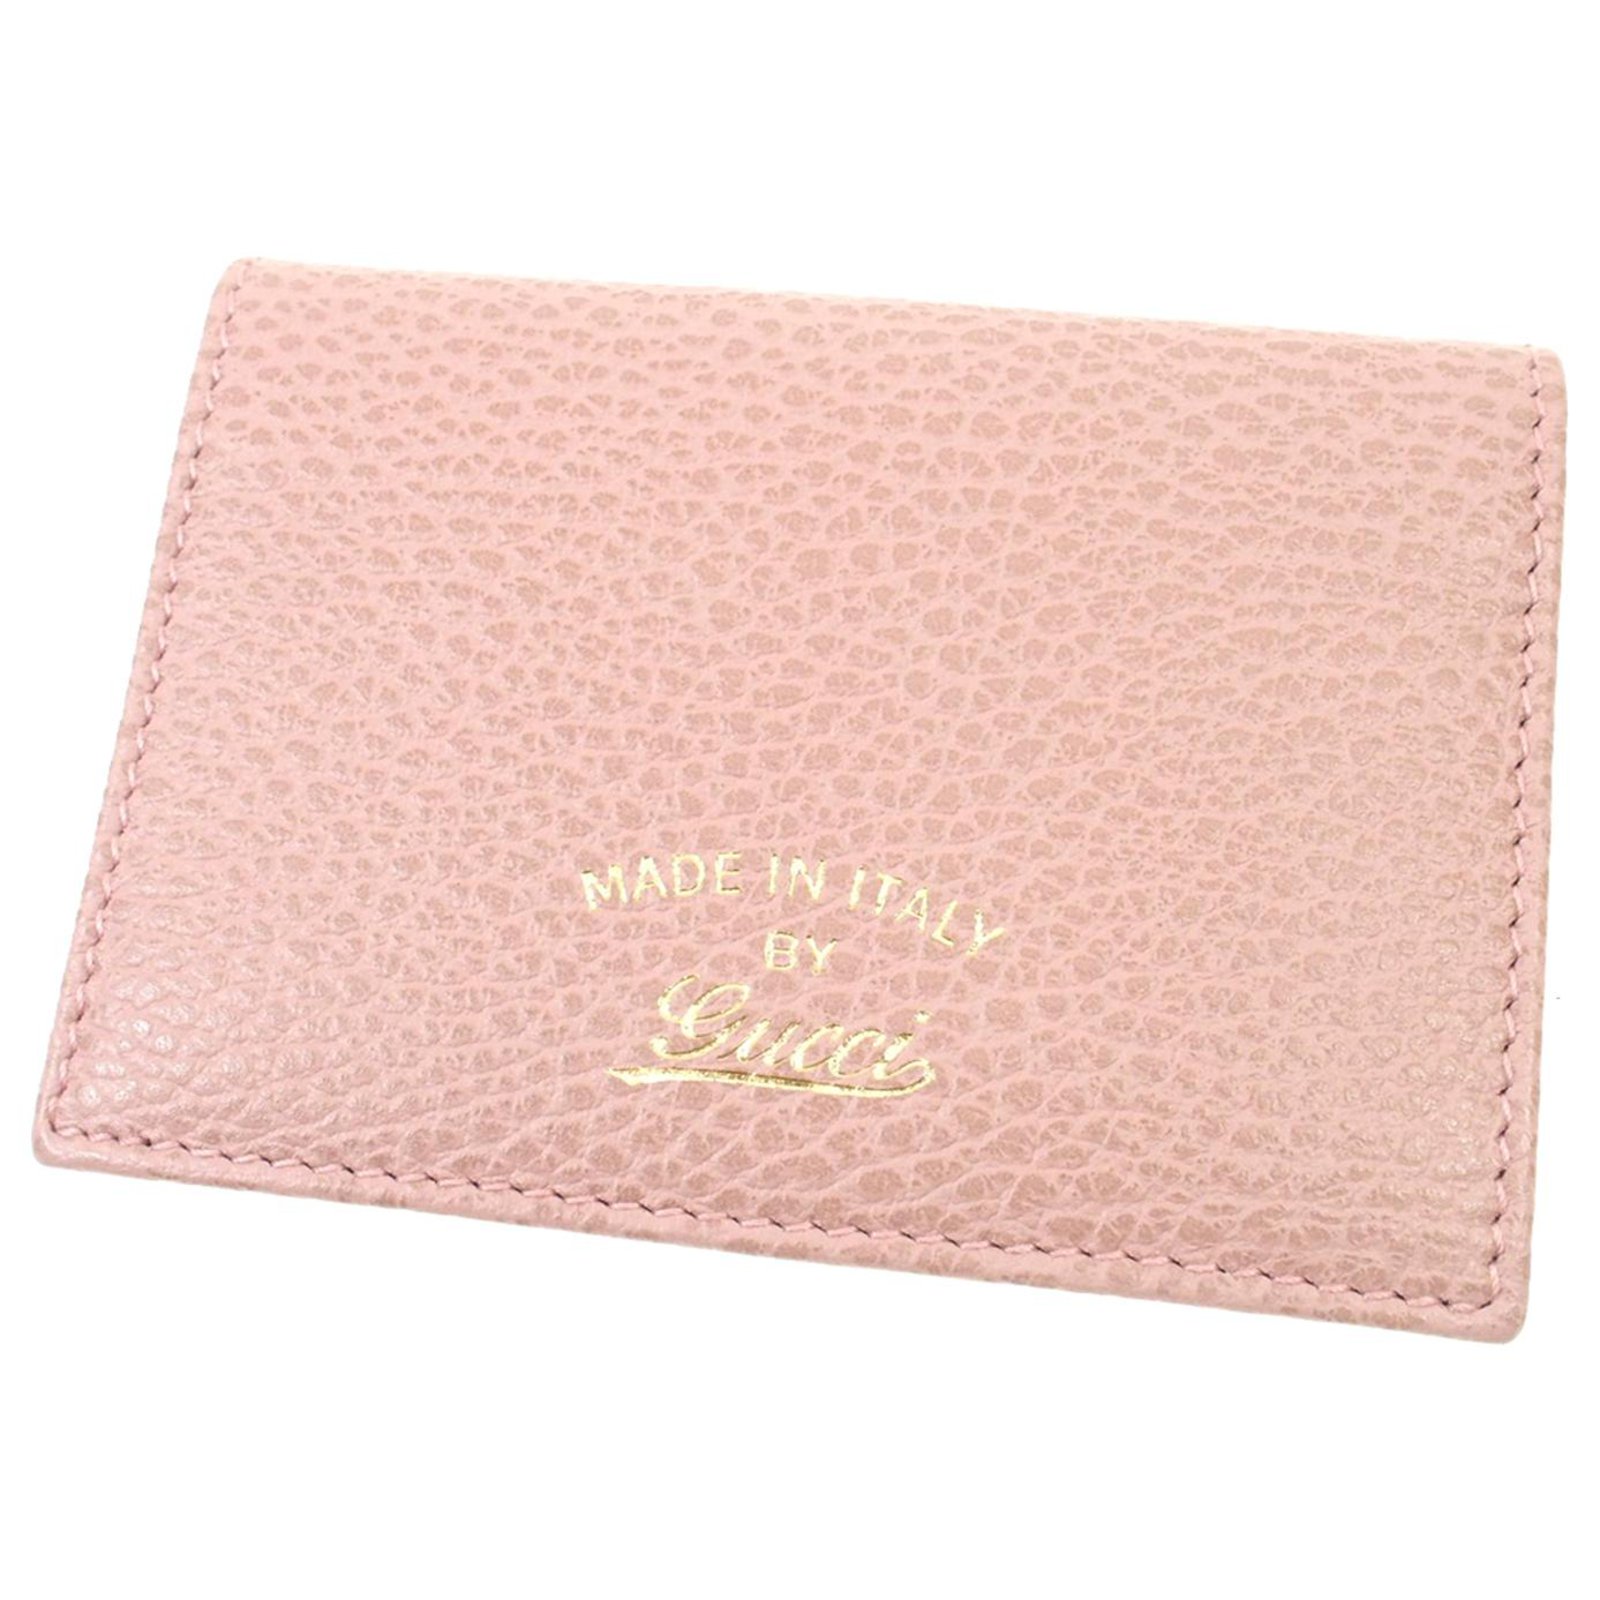 Louis Vuitton Pink Leather Passport Cover